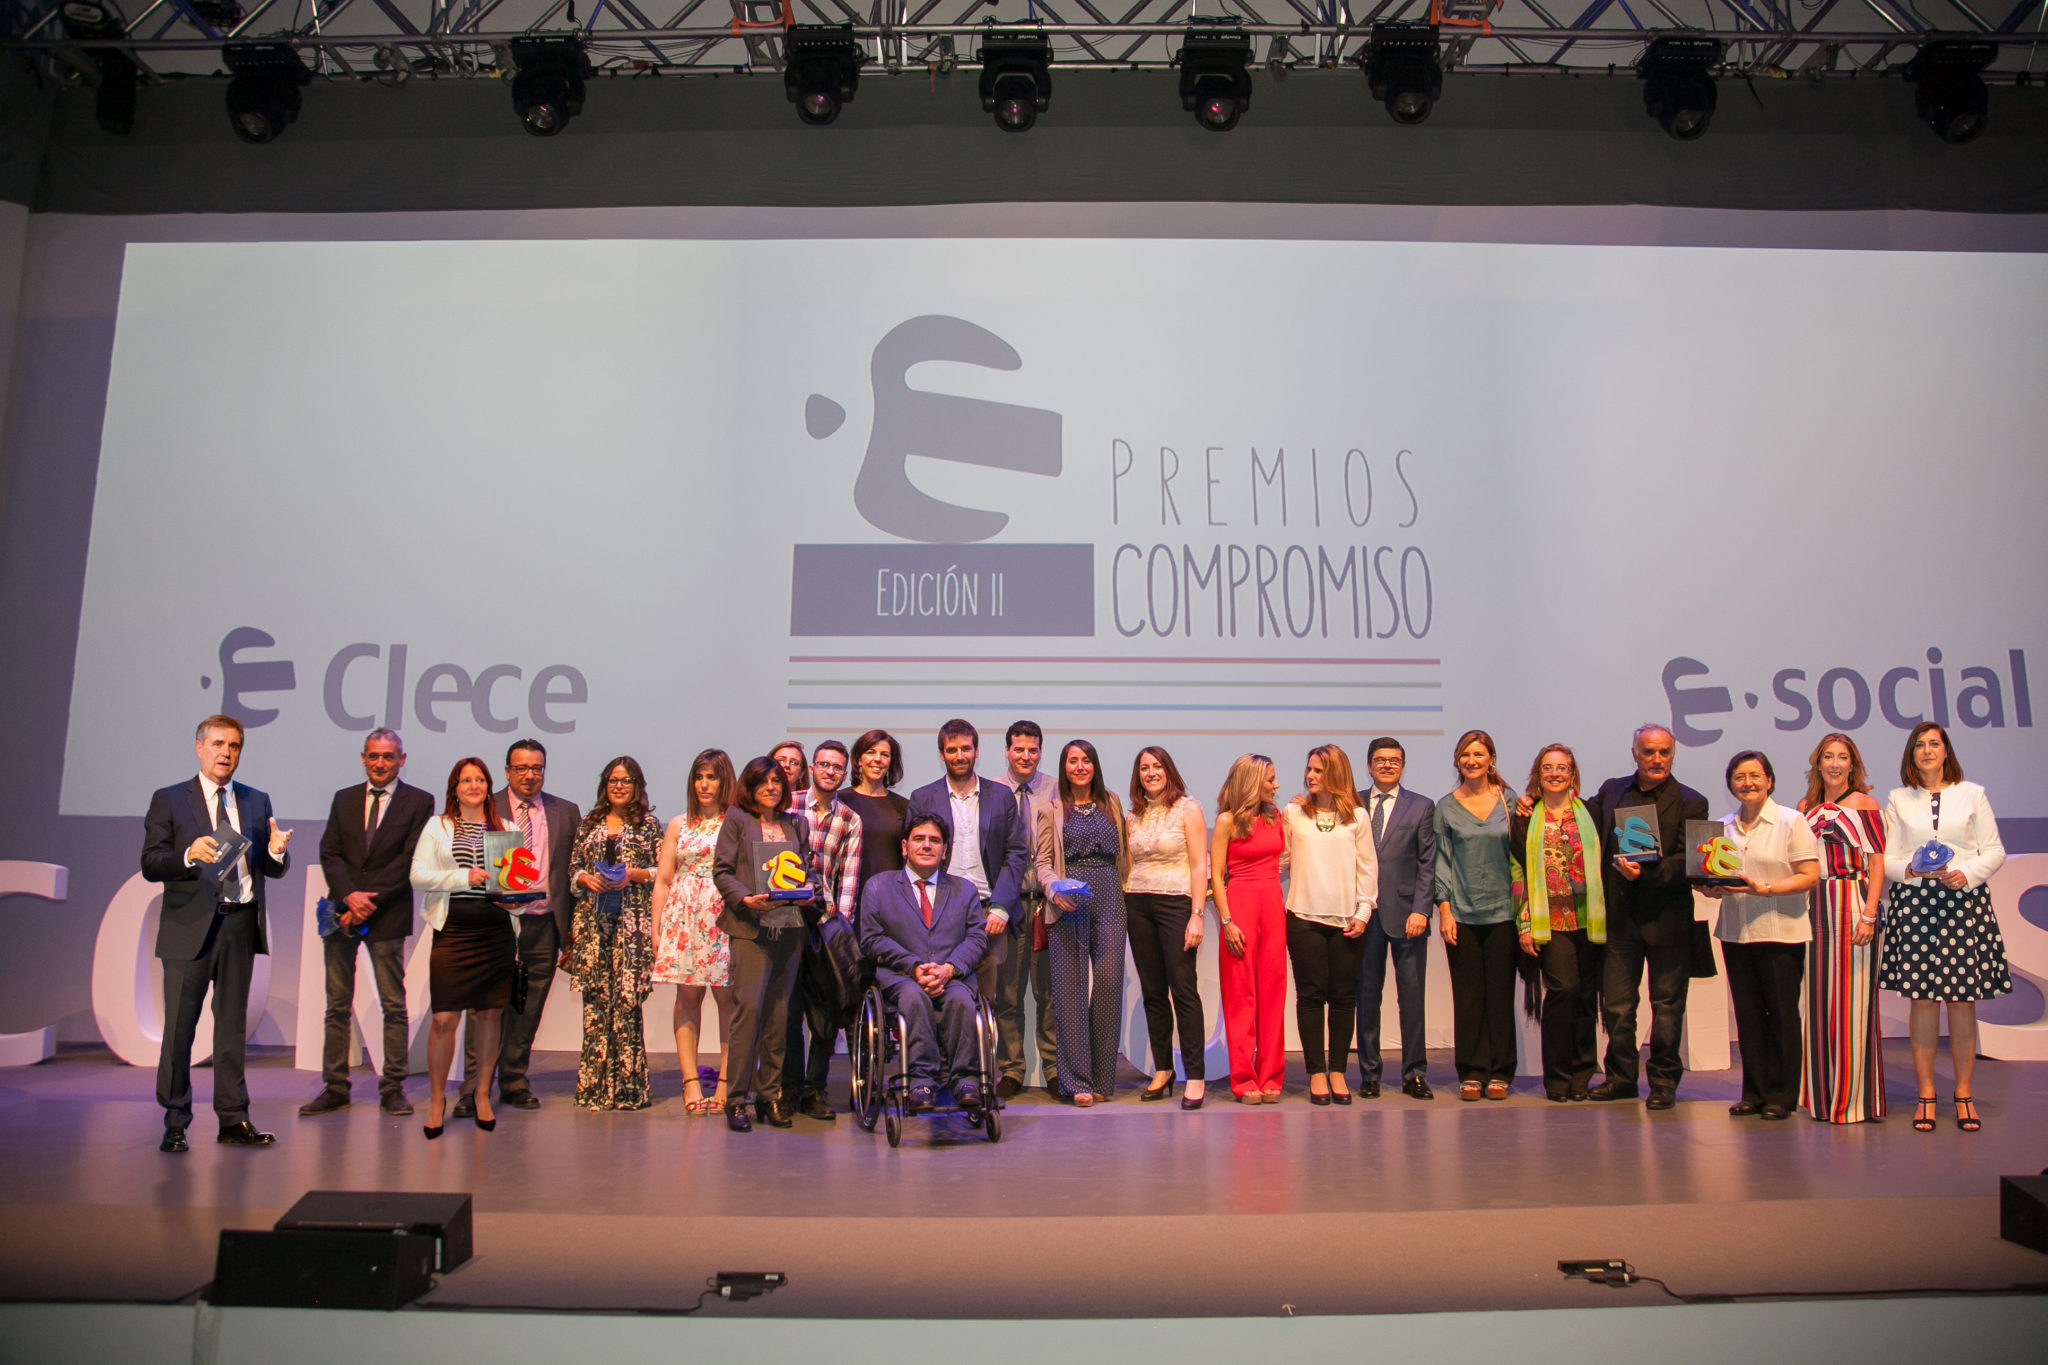 Compromiso Awards Clece 2016